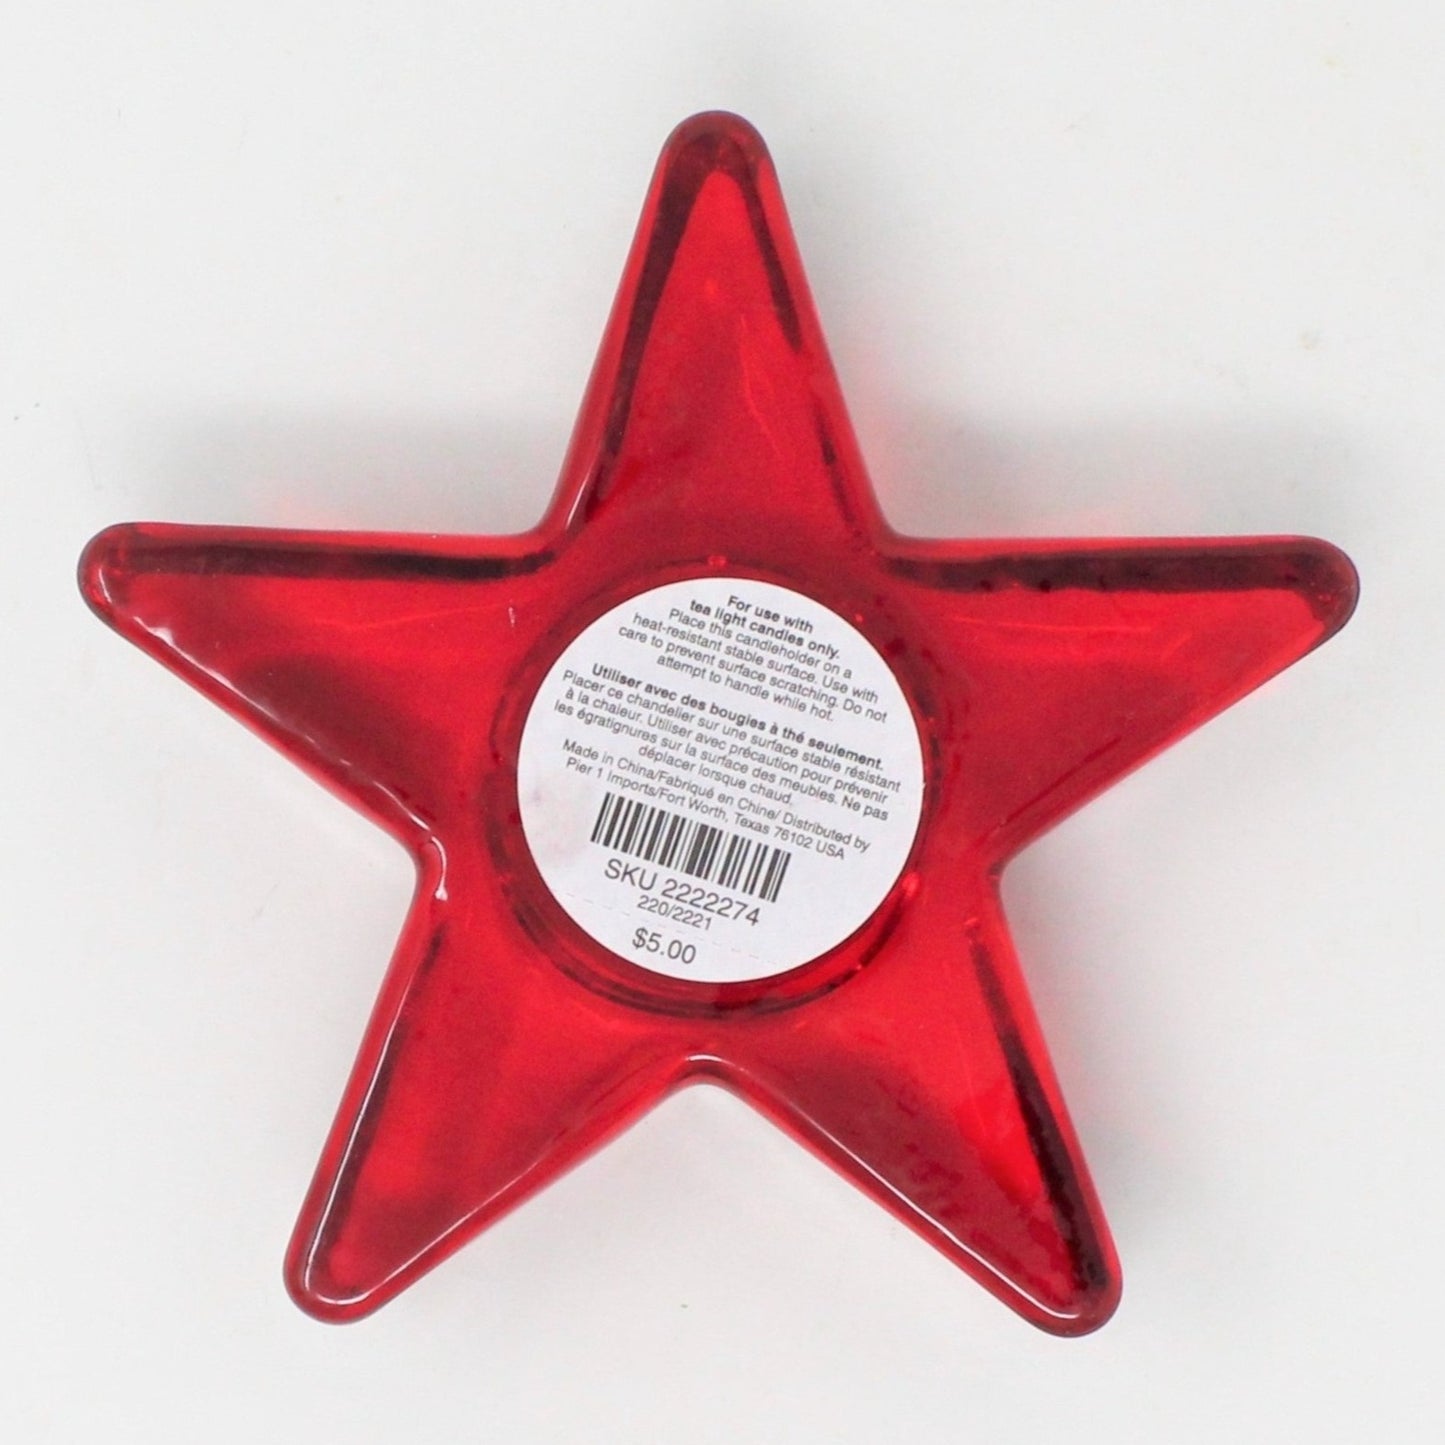 Candle Holder, Ruby Red Star Shaped Tealight Holder, Red Glass